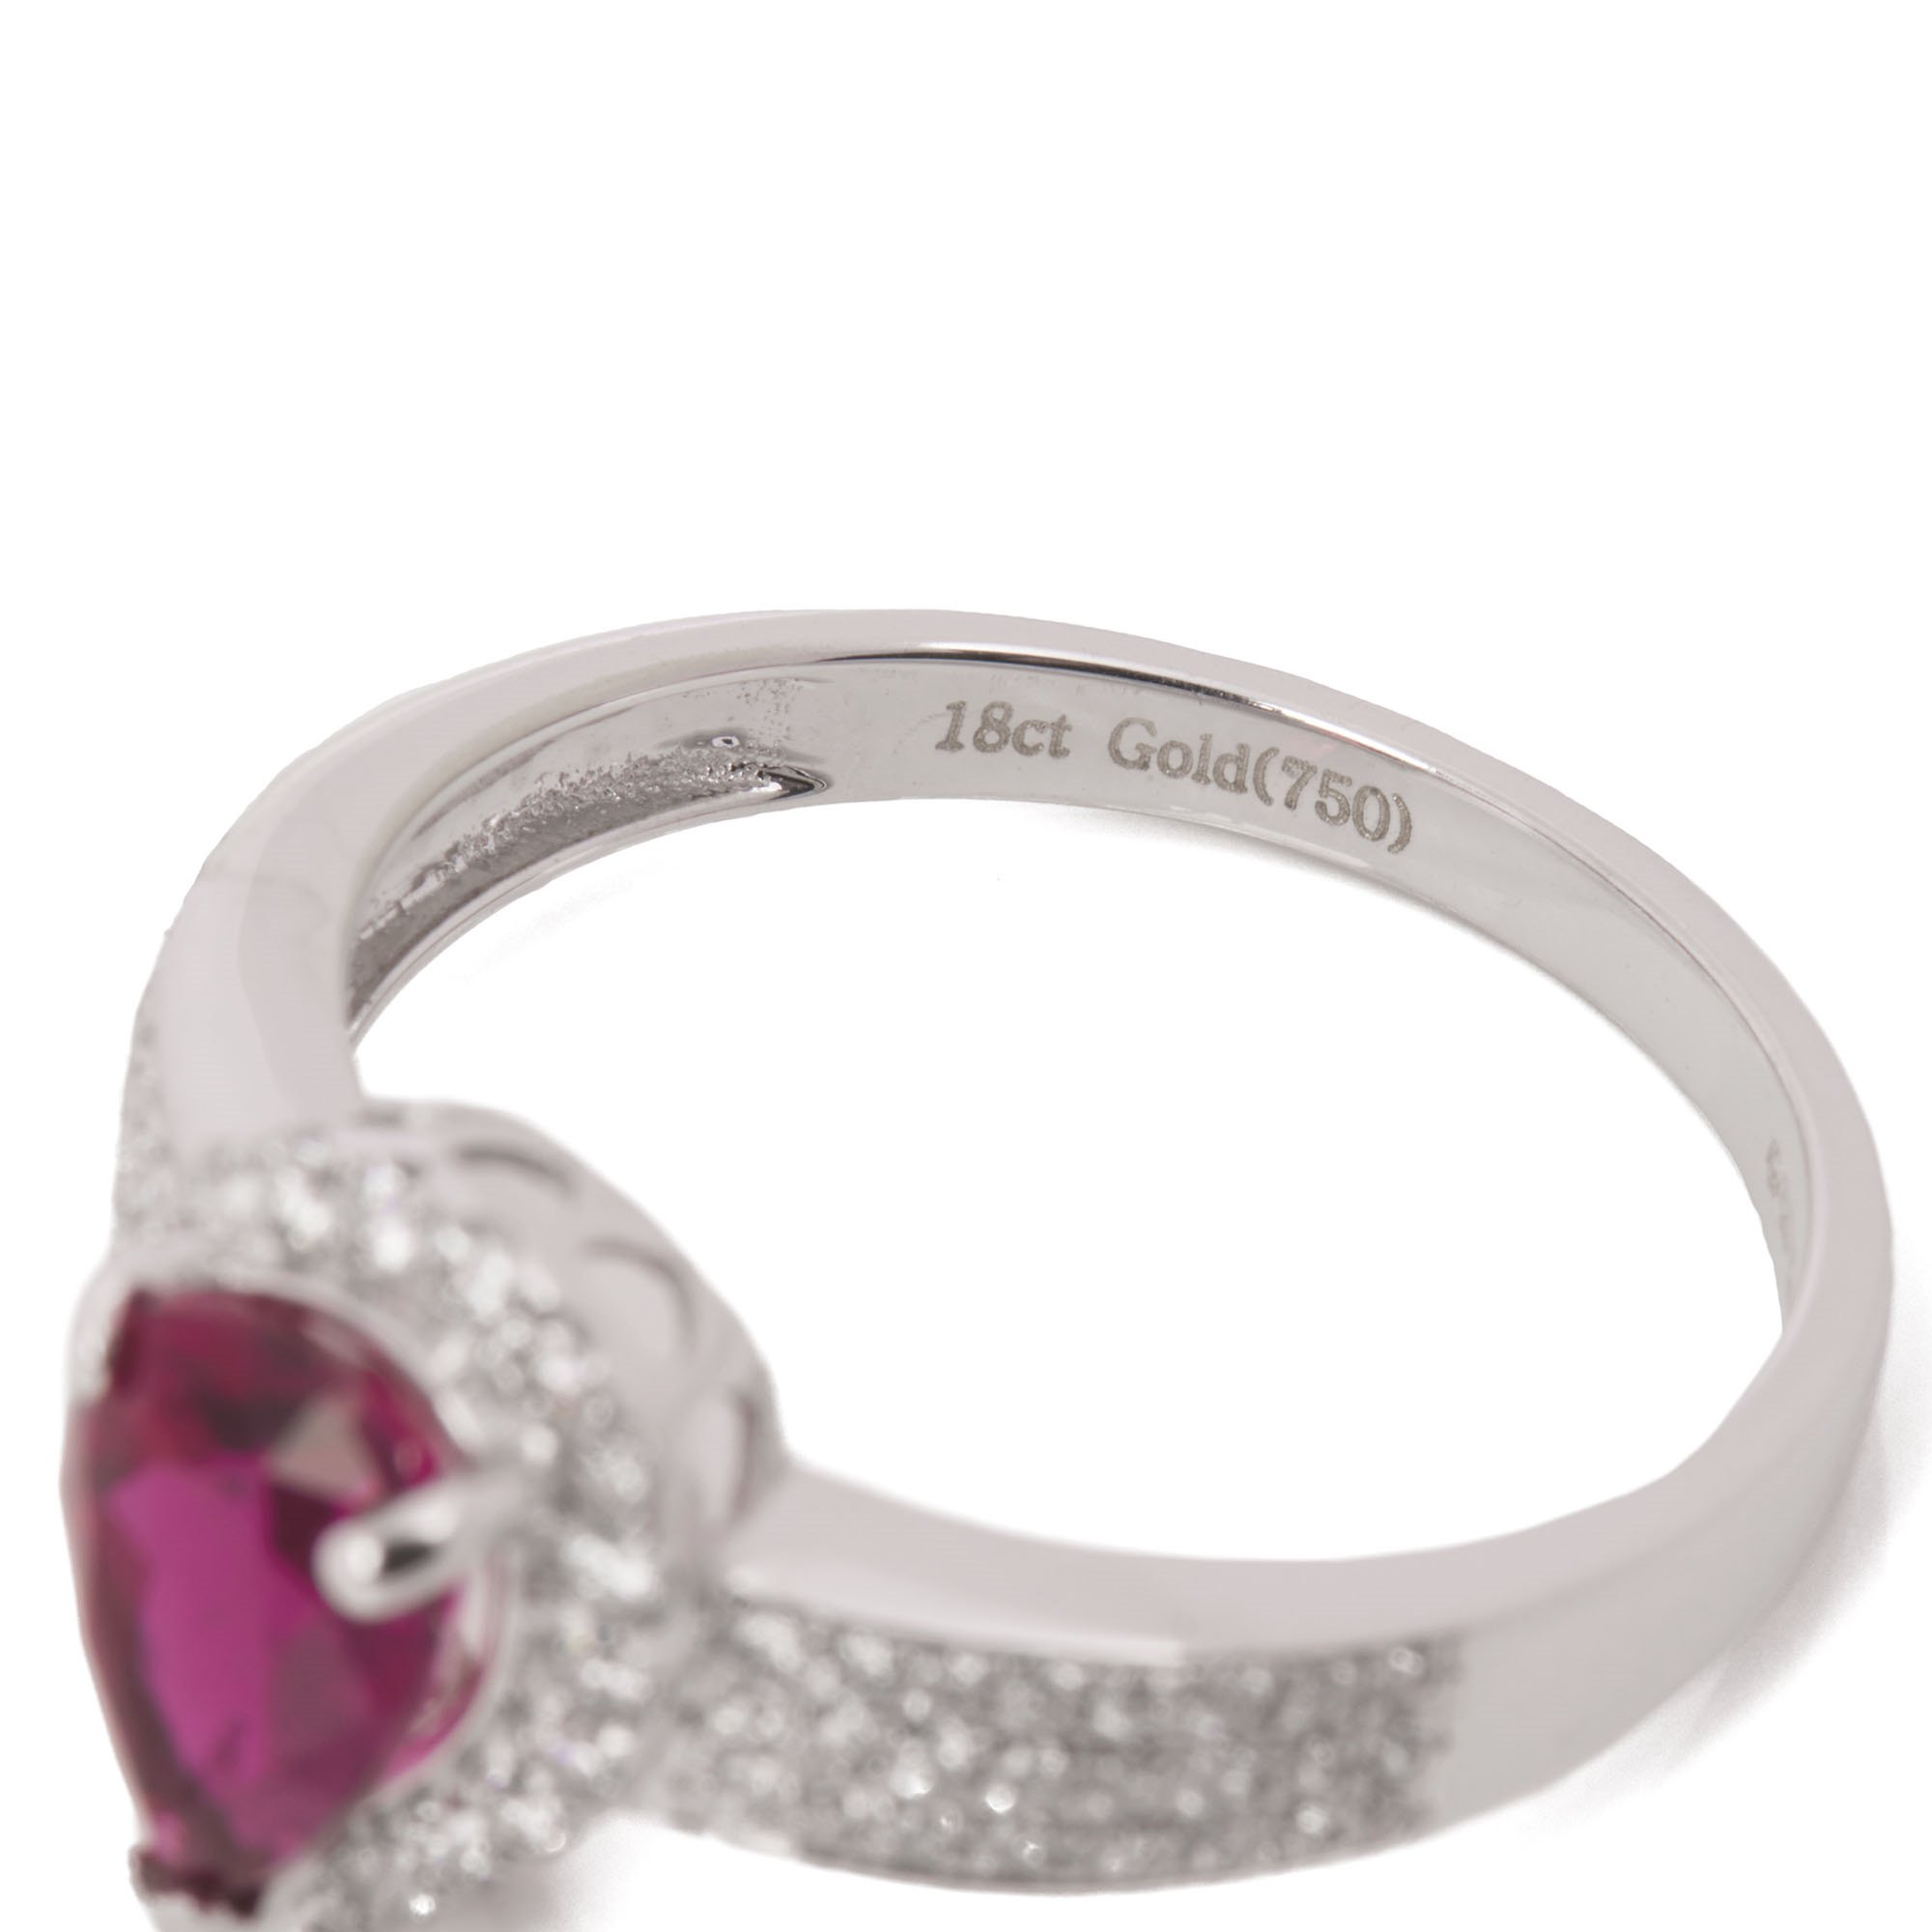 David Jerome Certified 1.23ct Pear Cut Rubellite and Diamond Ring